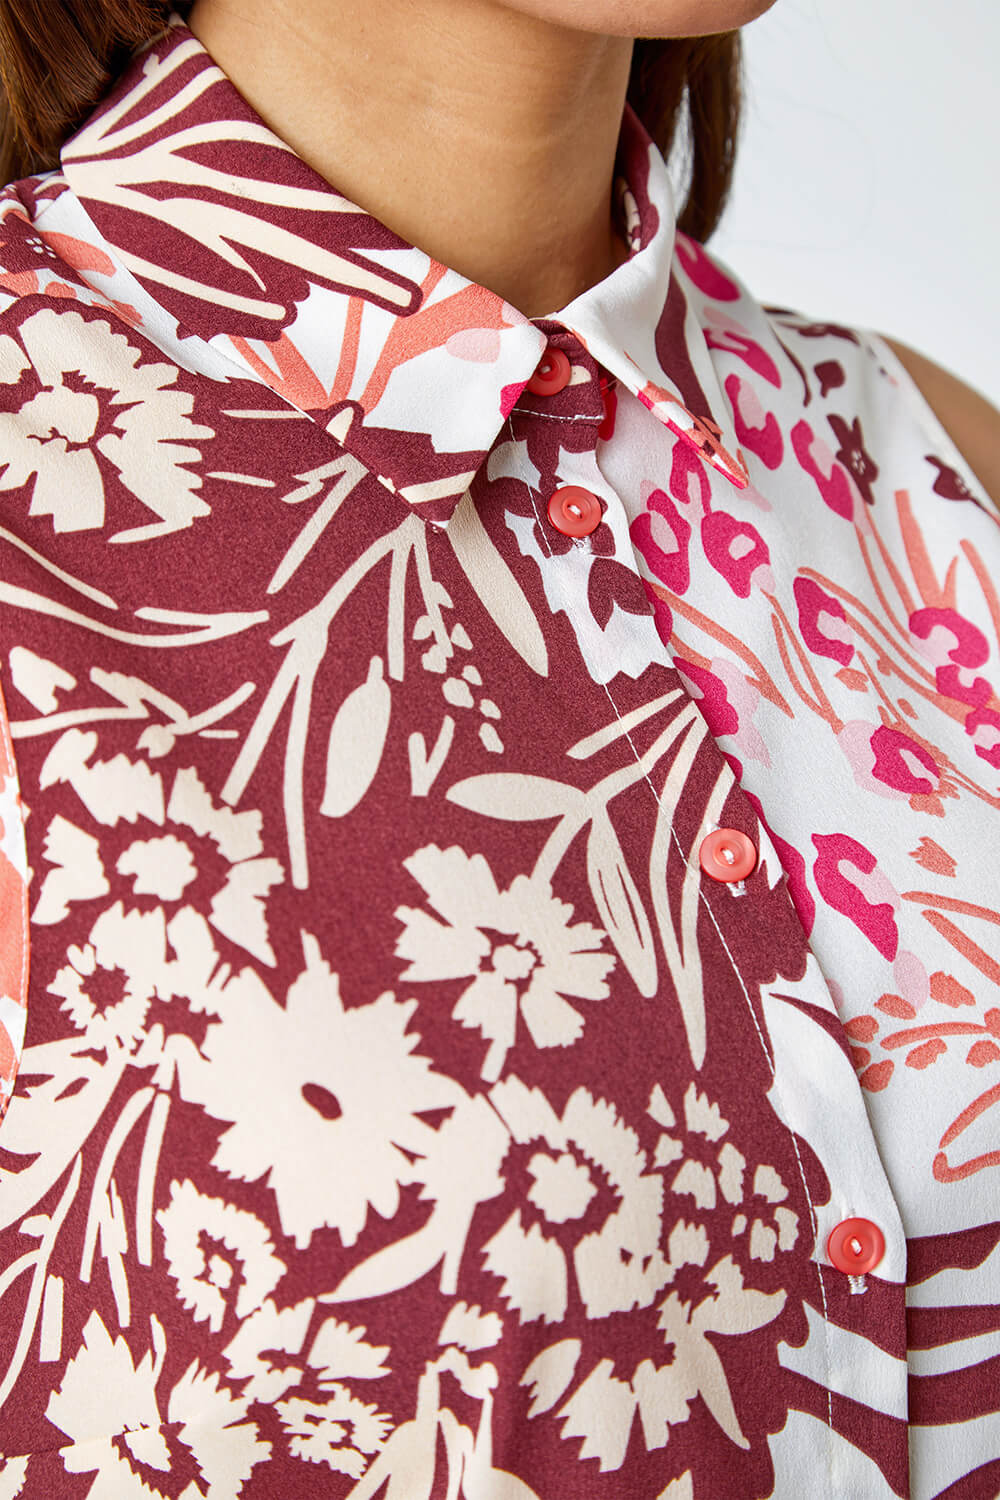 PINK Sleeveless Floral Print Blouse, Image 5 of 5